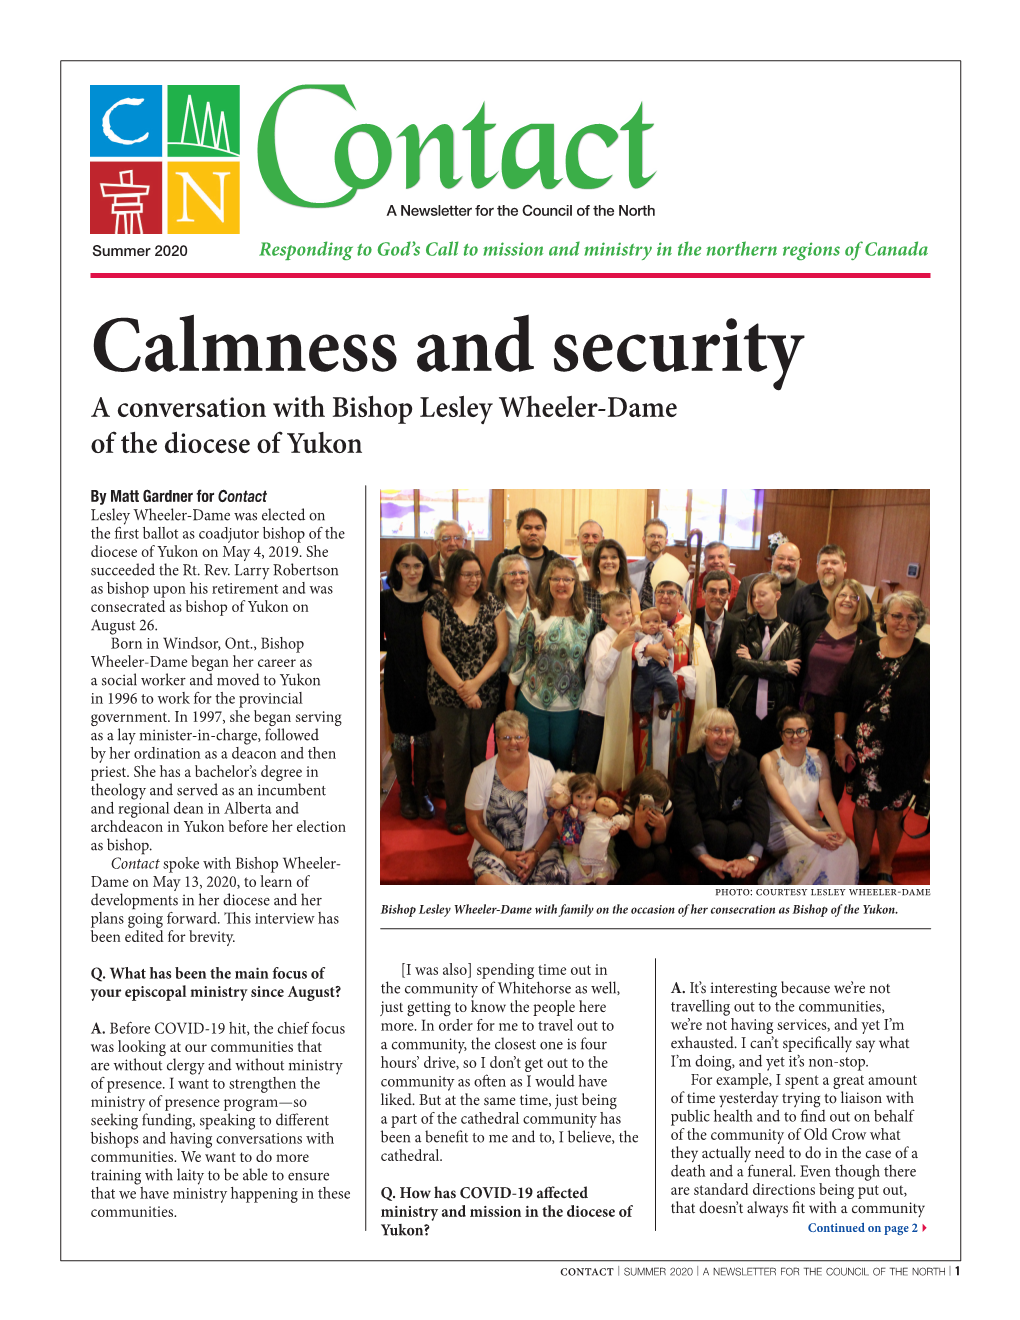 Calmness and Security a Conversation with Bishop Lesley Wheeler-Dame of the Diocese of Yukon